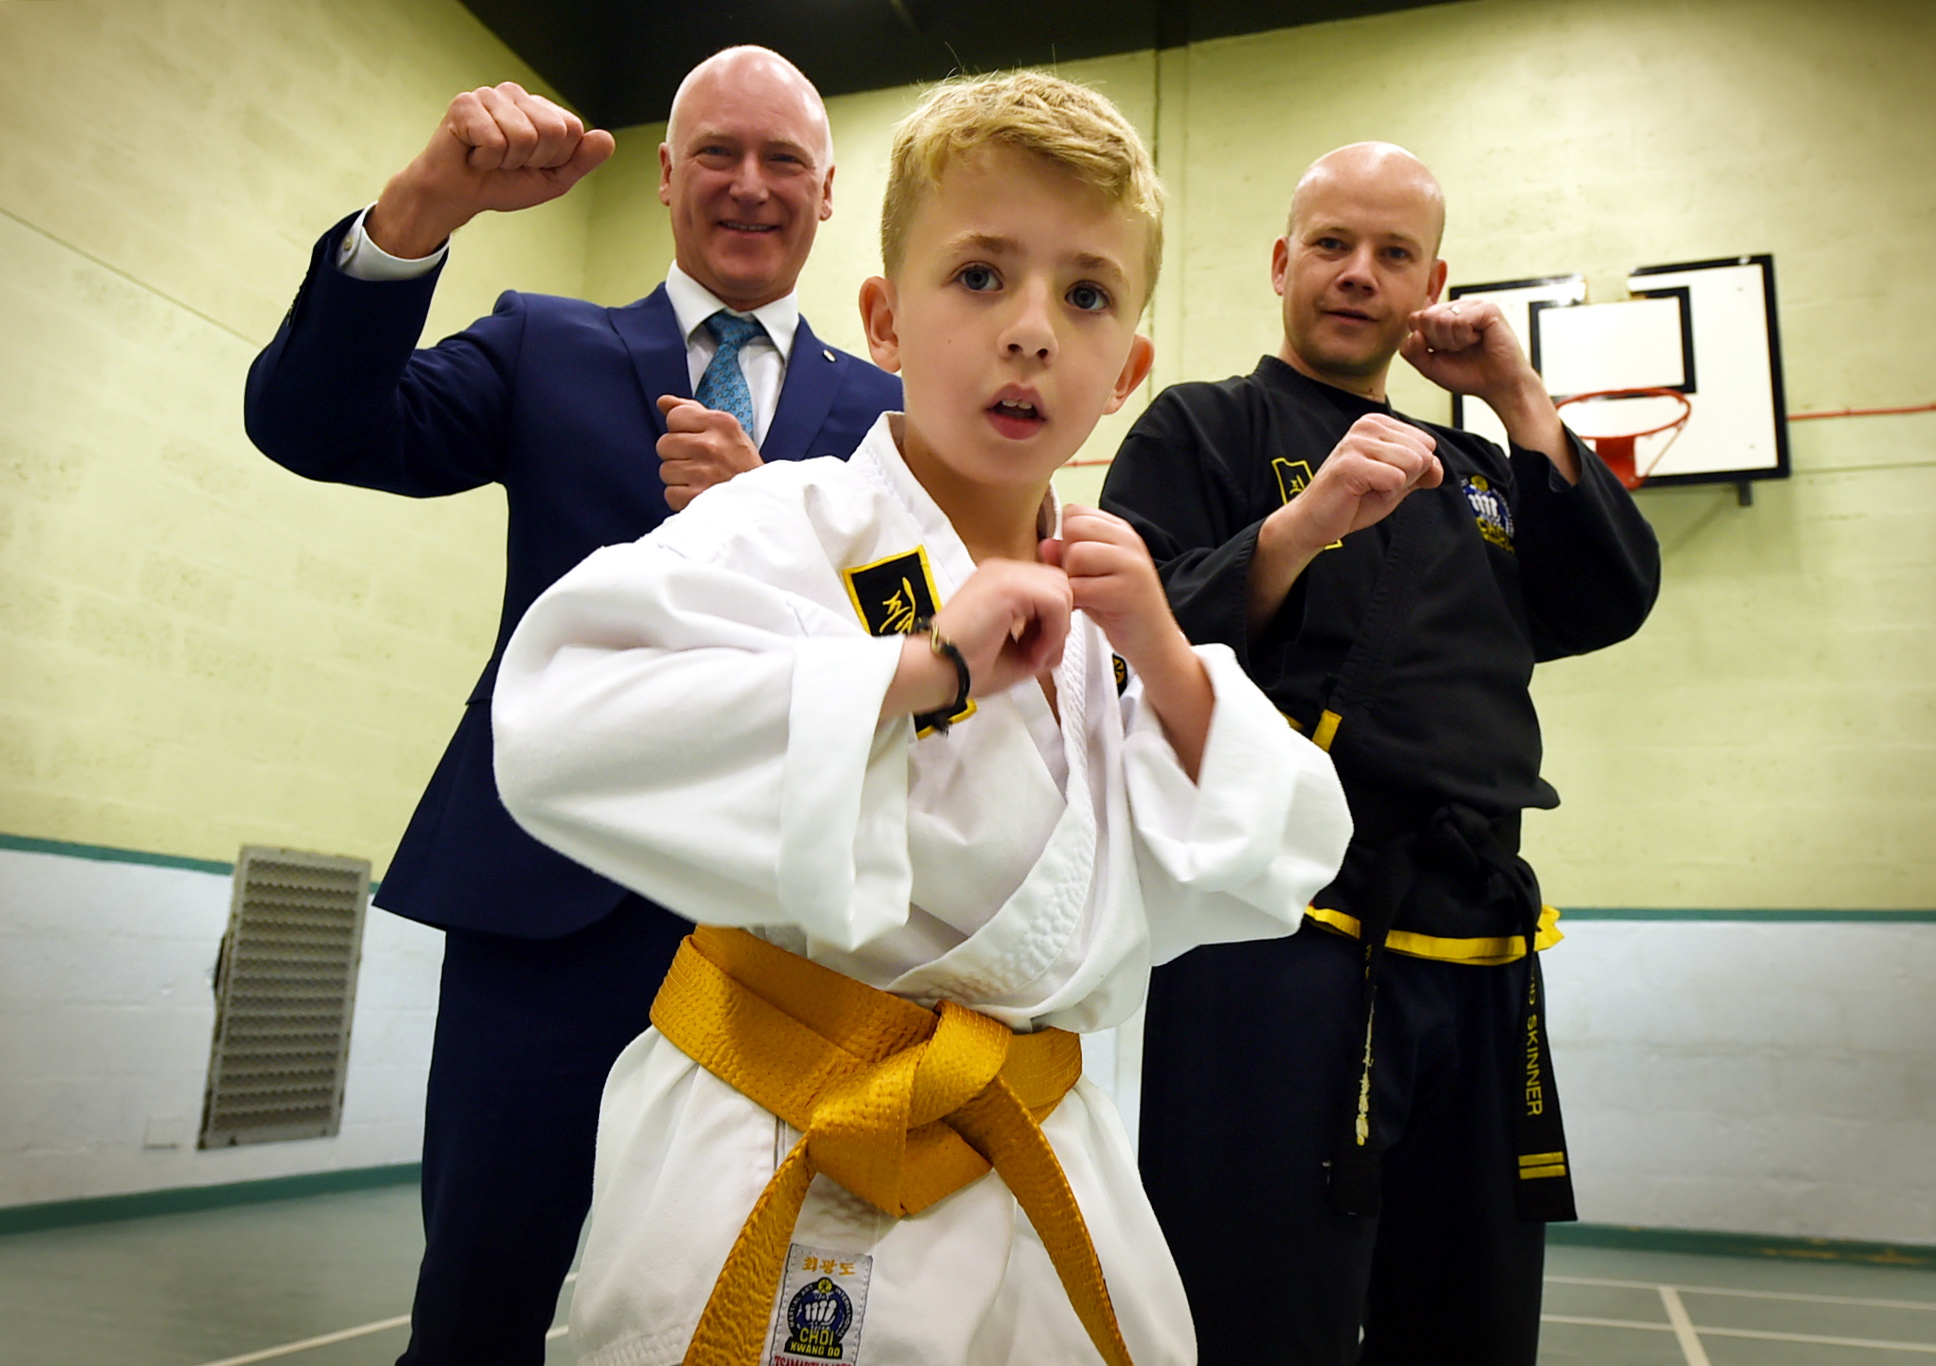 Alex Crichton practices his Choi Kwang-Do with instructor Dave Skinner and Public Health Minister Joe FitzPatrick